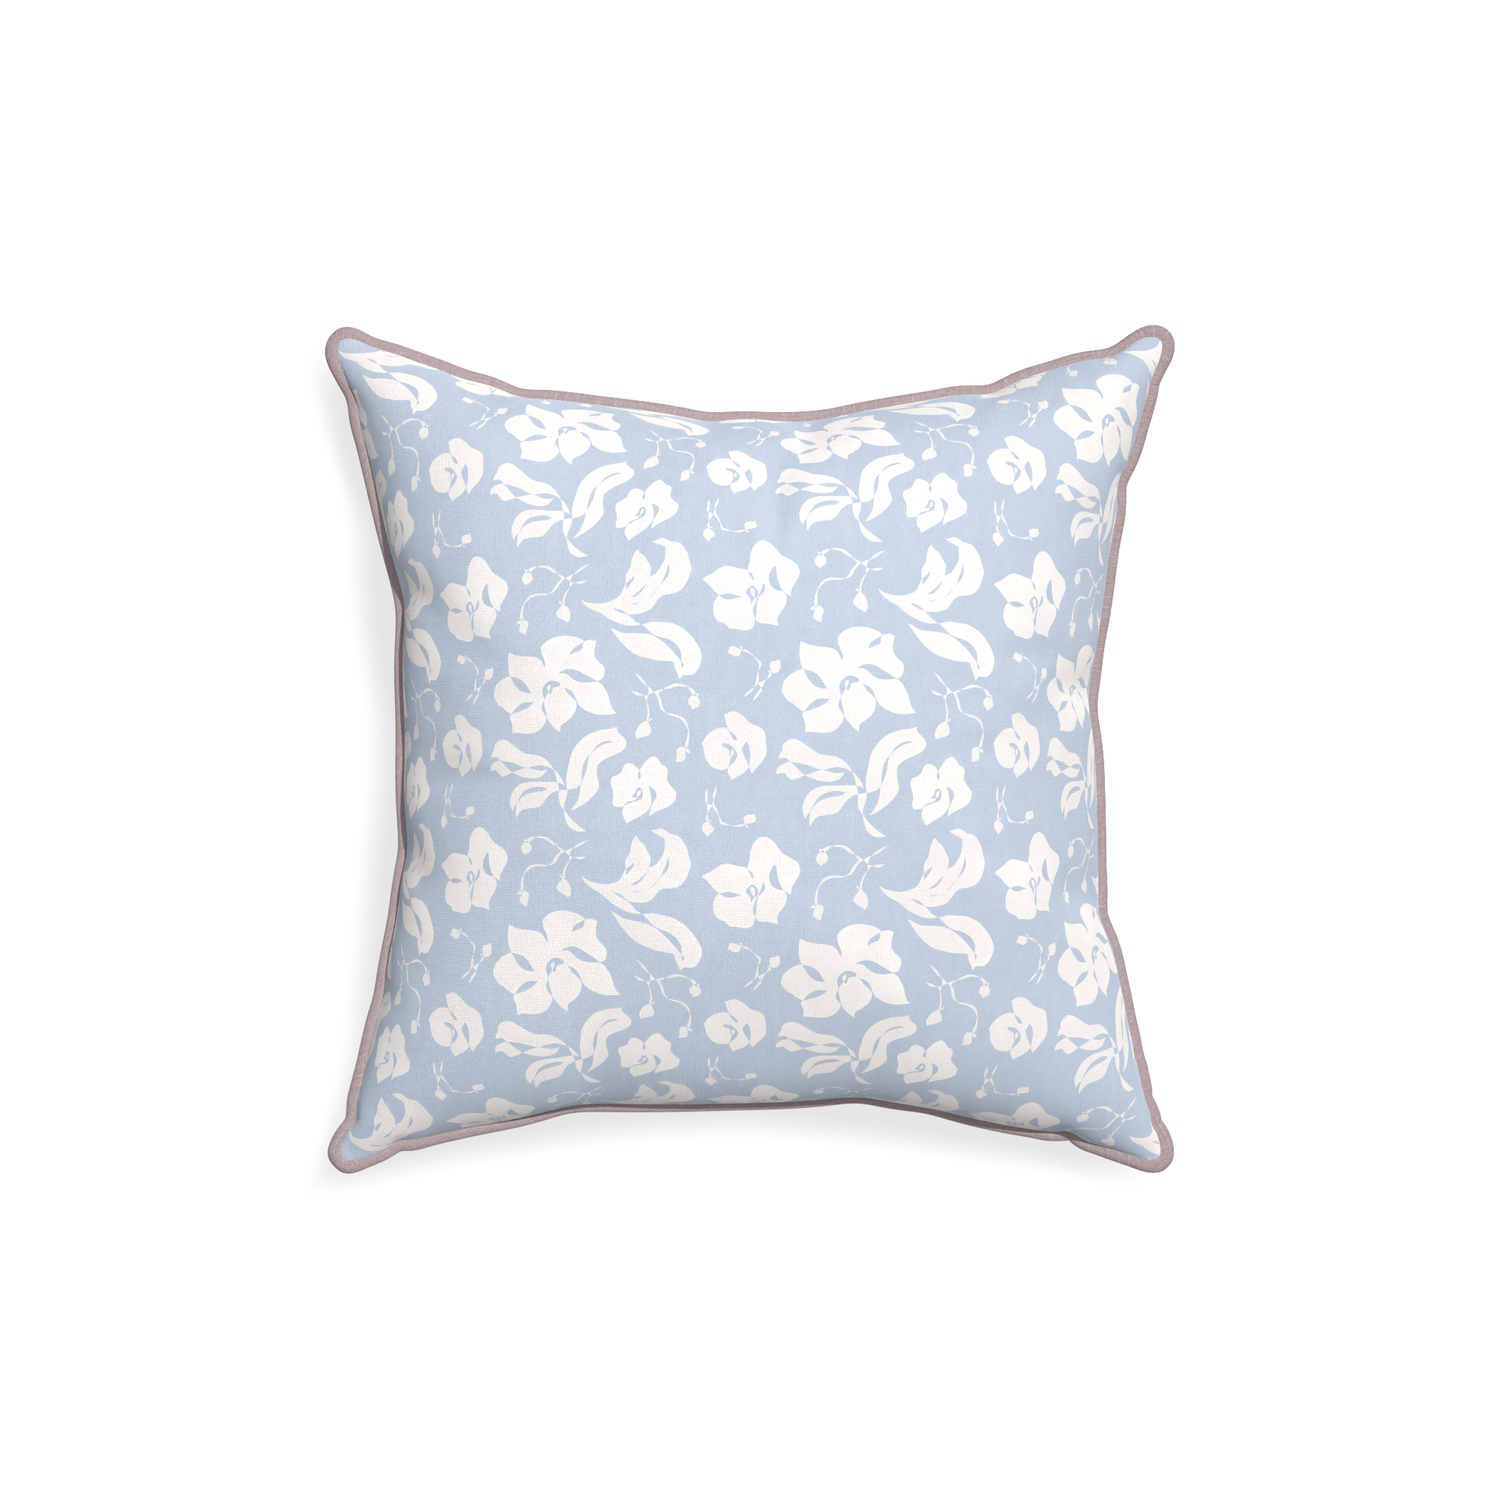 18-square georgia custom cornflower blue floralpillow with orchid piping on white background